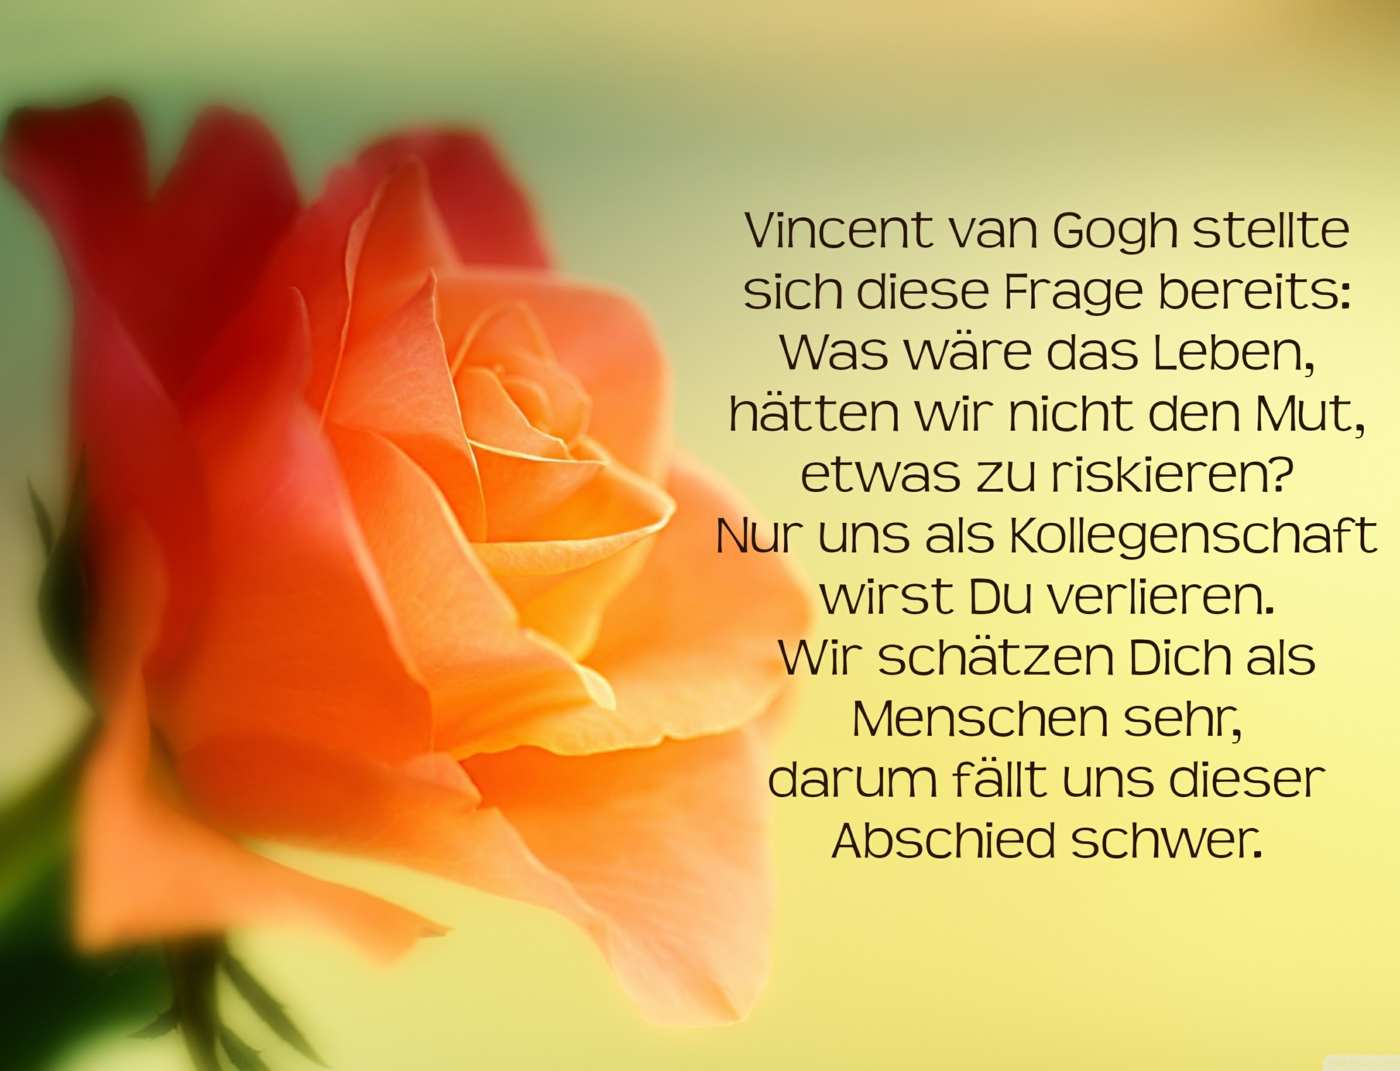 Say goodbye to a colleague at work exchange with quote from van Gogh on orange rose